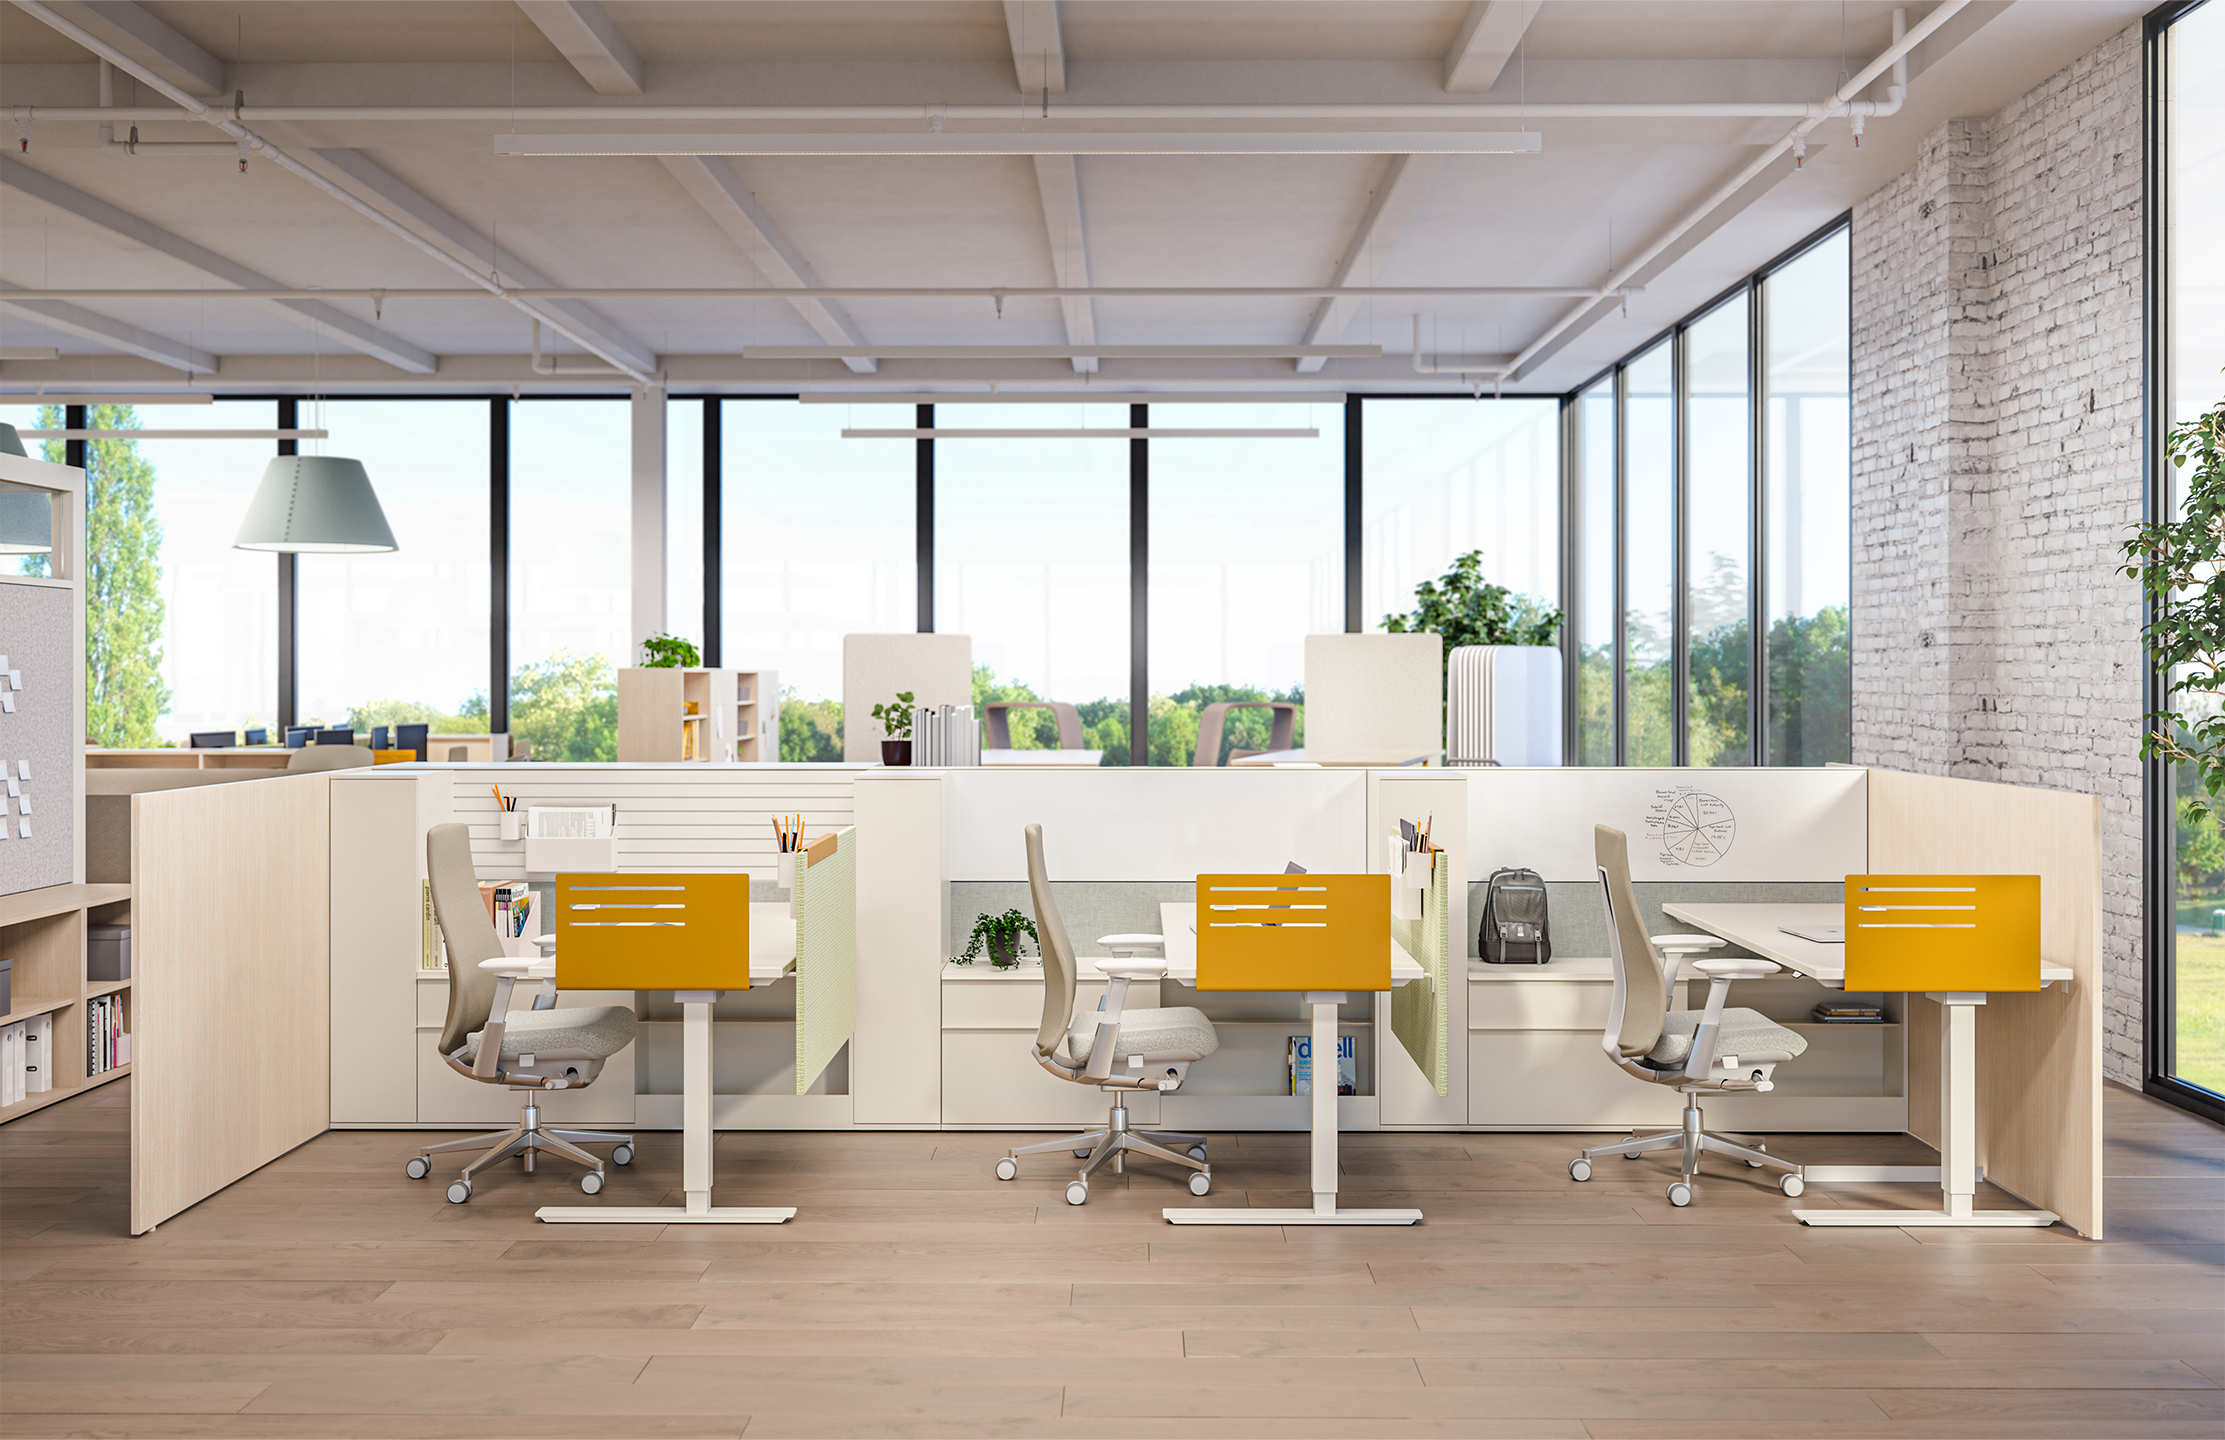 3 workspaces with height-adjustable tables, chairs & storage